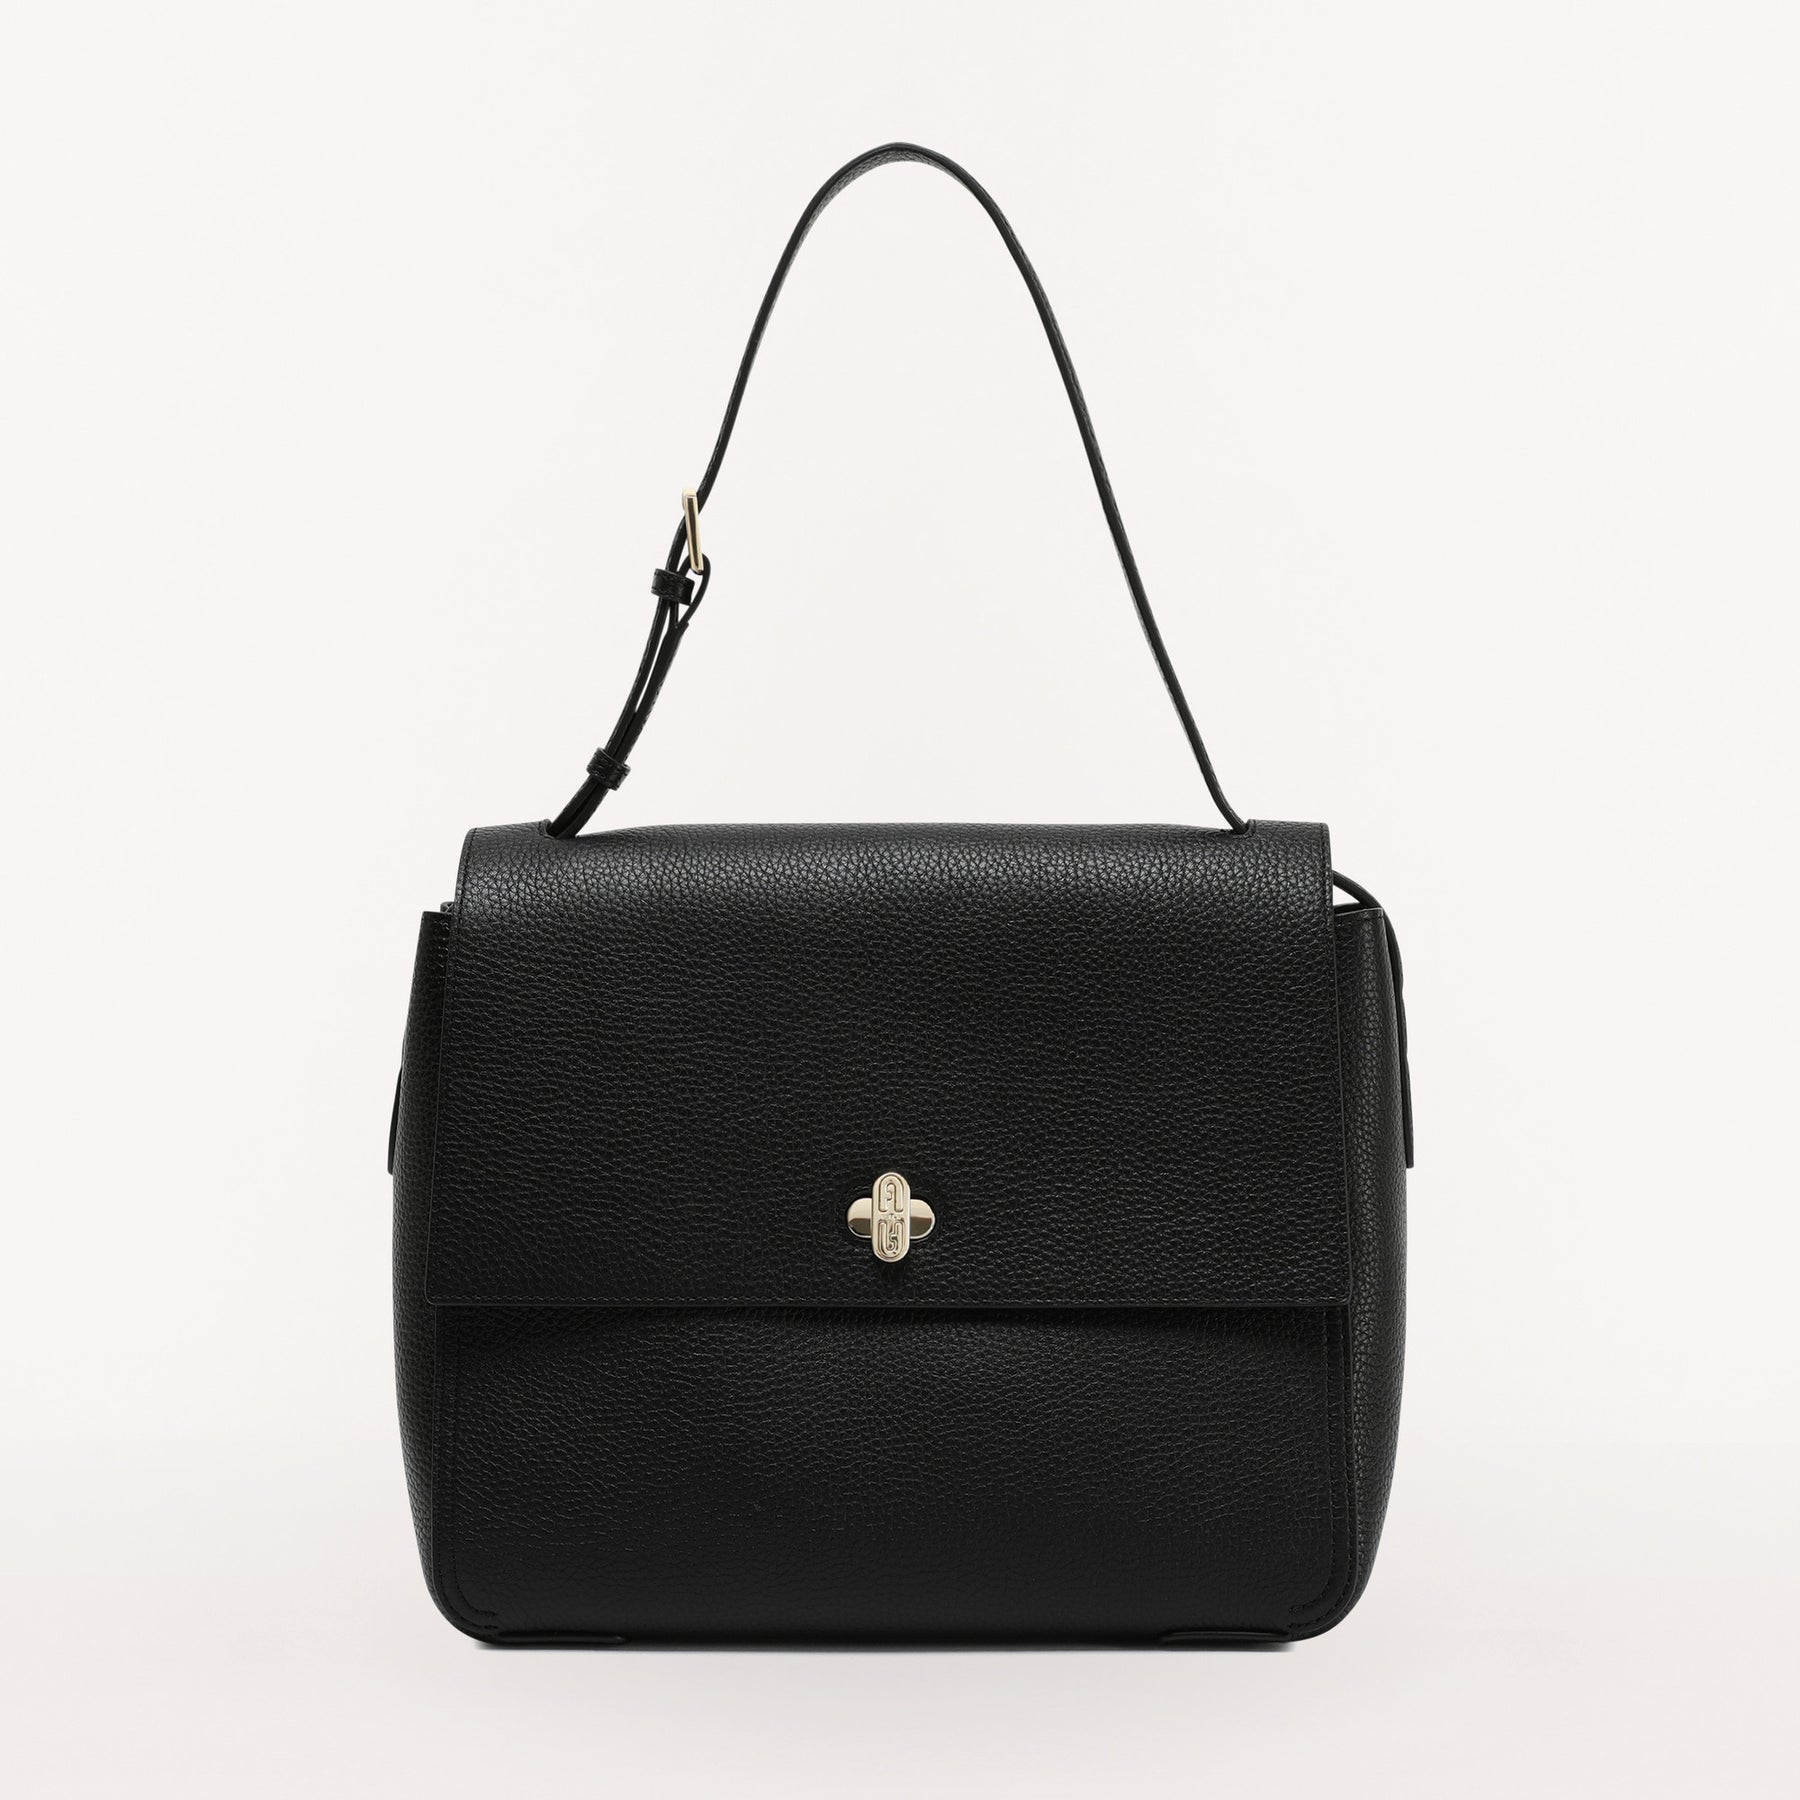 Grab this iconic Longchamp tote bag while it's on for 38% off on